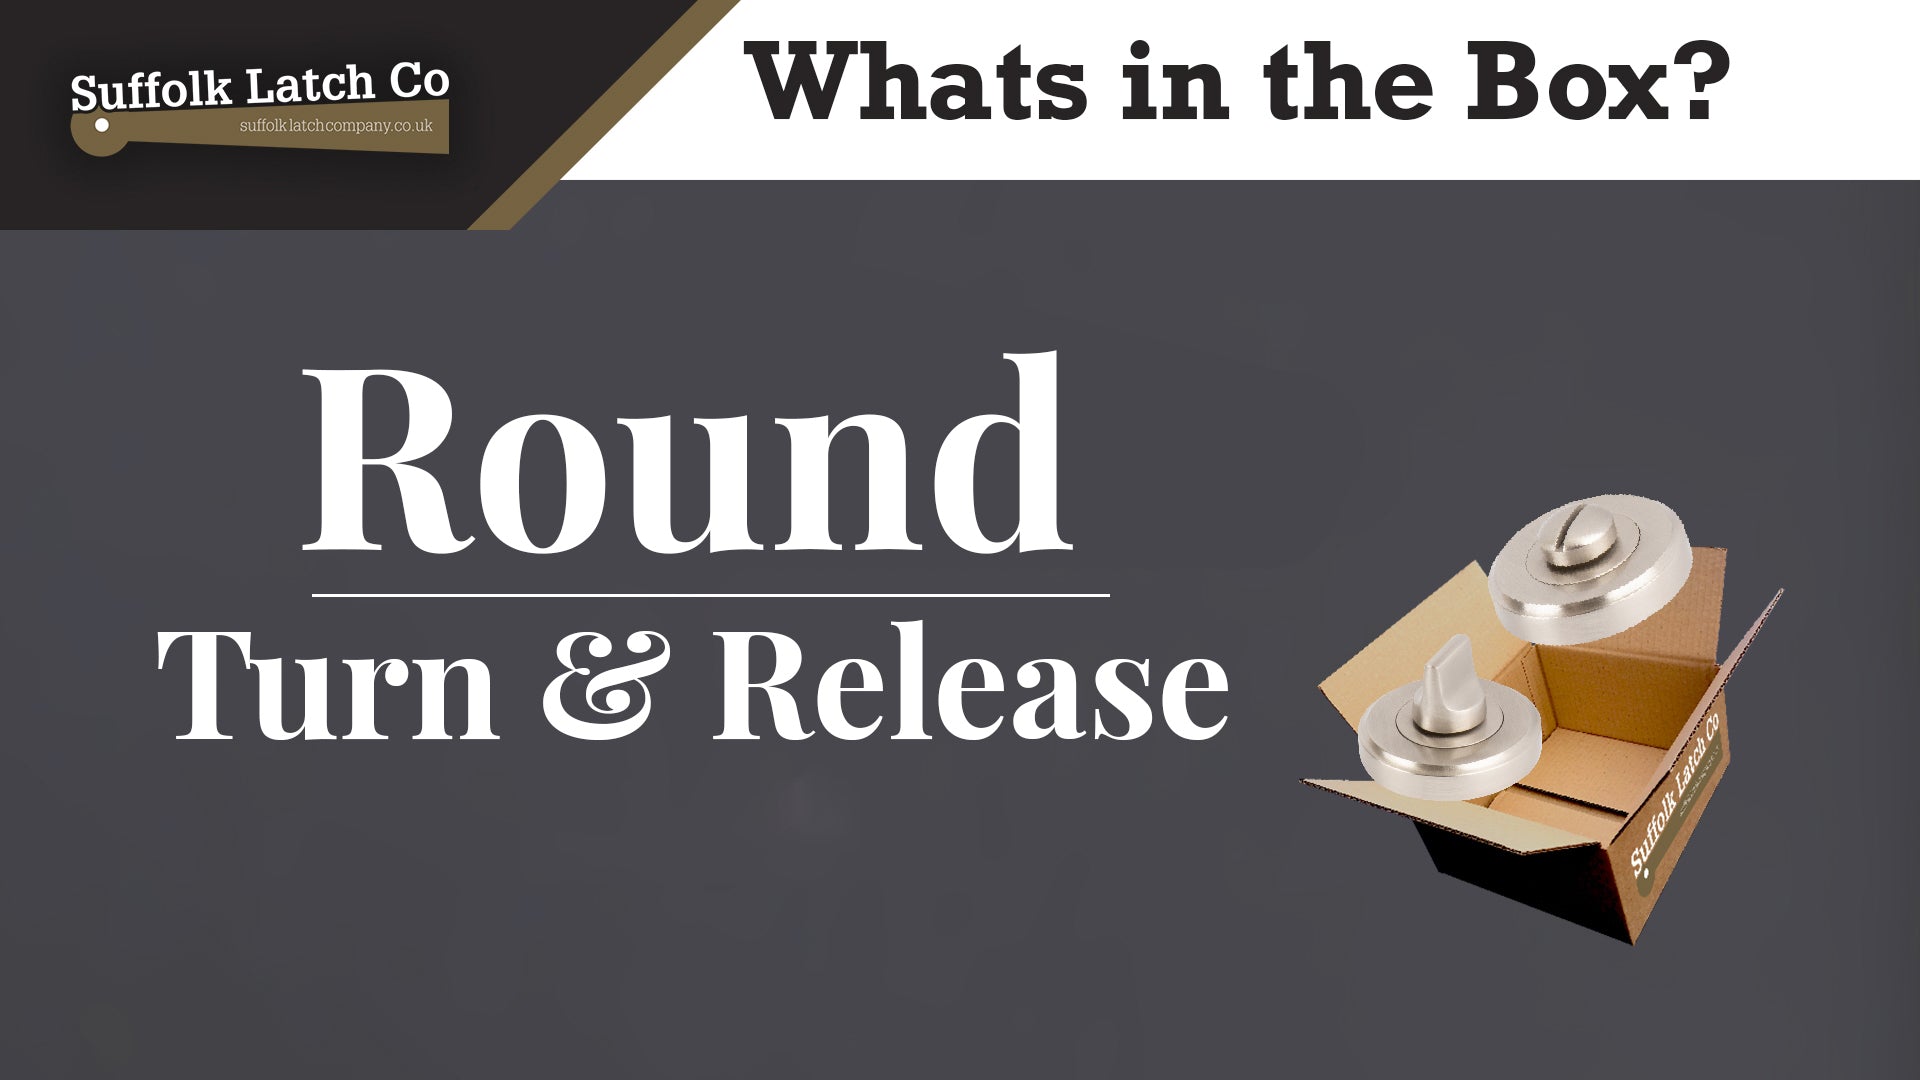 What's in the Box: Round Bathroom Turn & Release